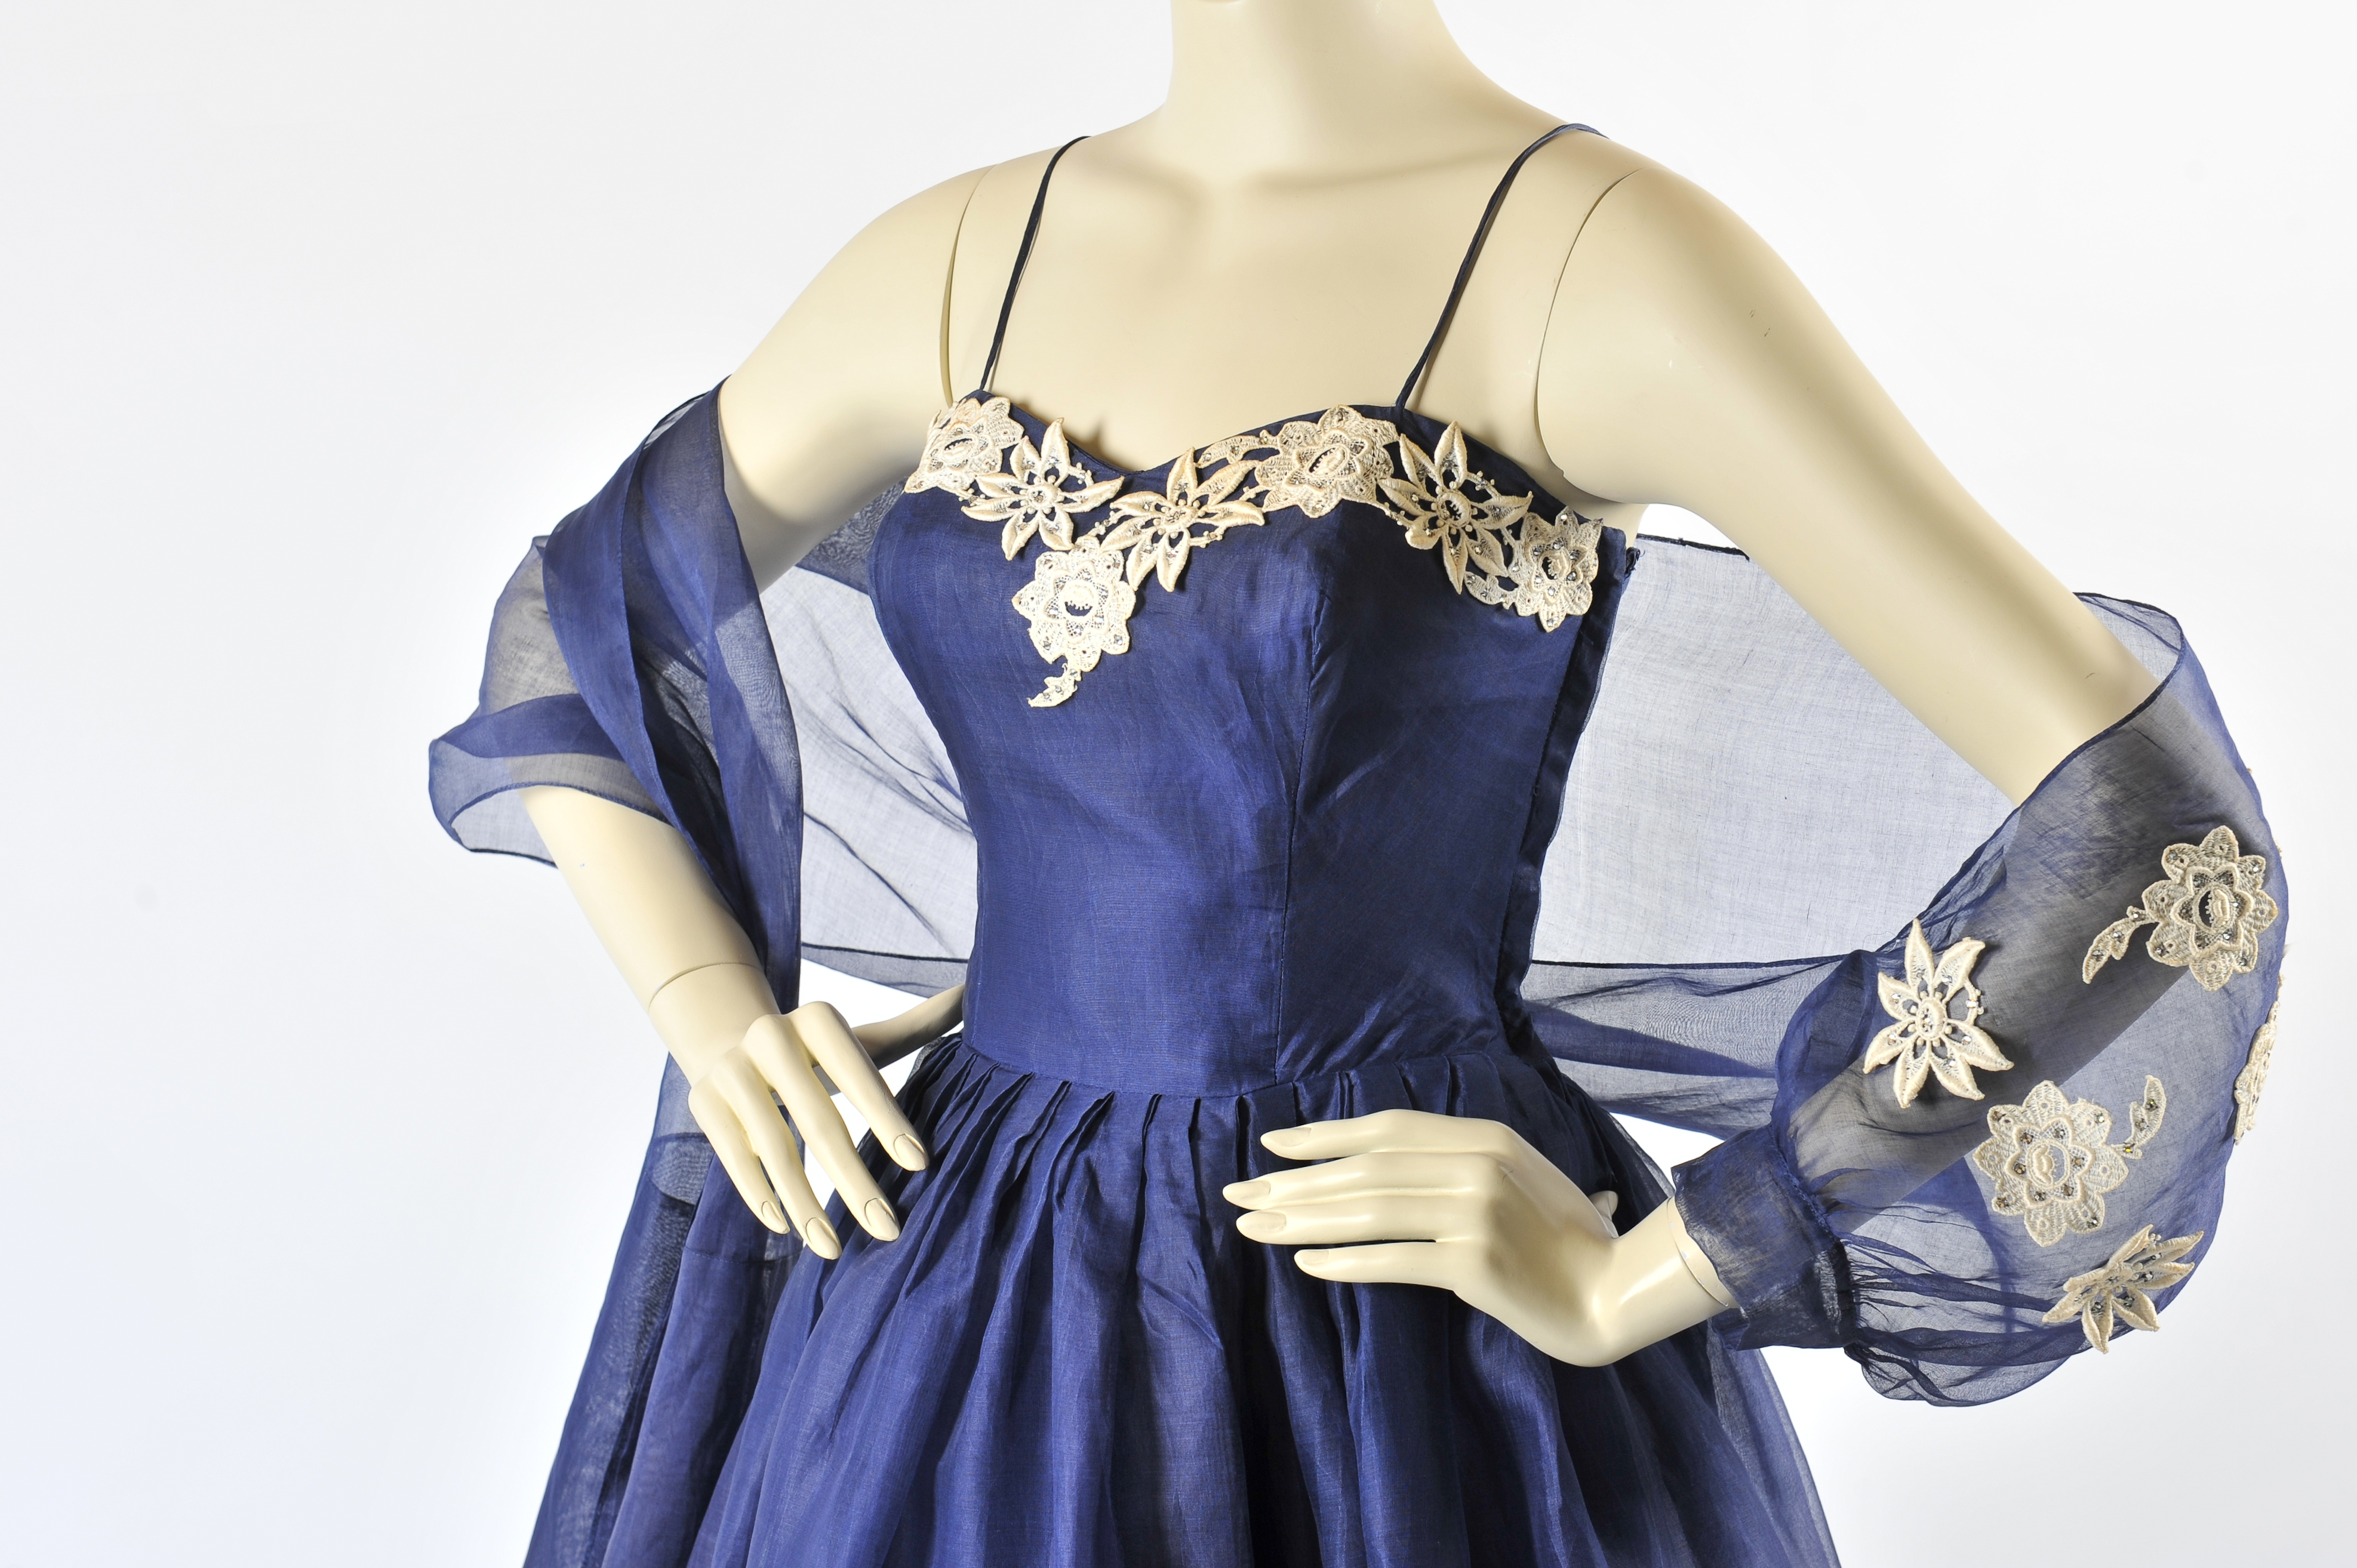 A vintage dress with a sweetheart neckline and spaghetti straps. The dress is a rich blue colour and has white lace applique flowers along the bustline. There is also a sheer matching bolero.